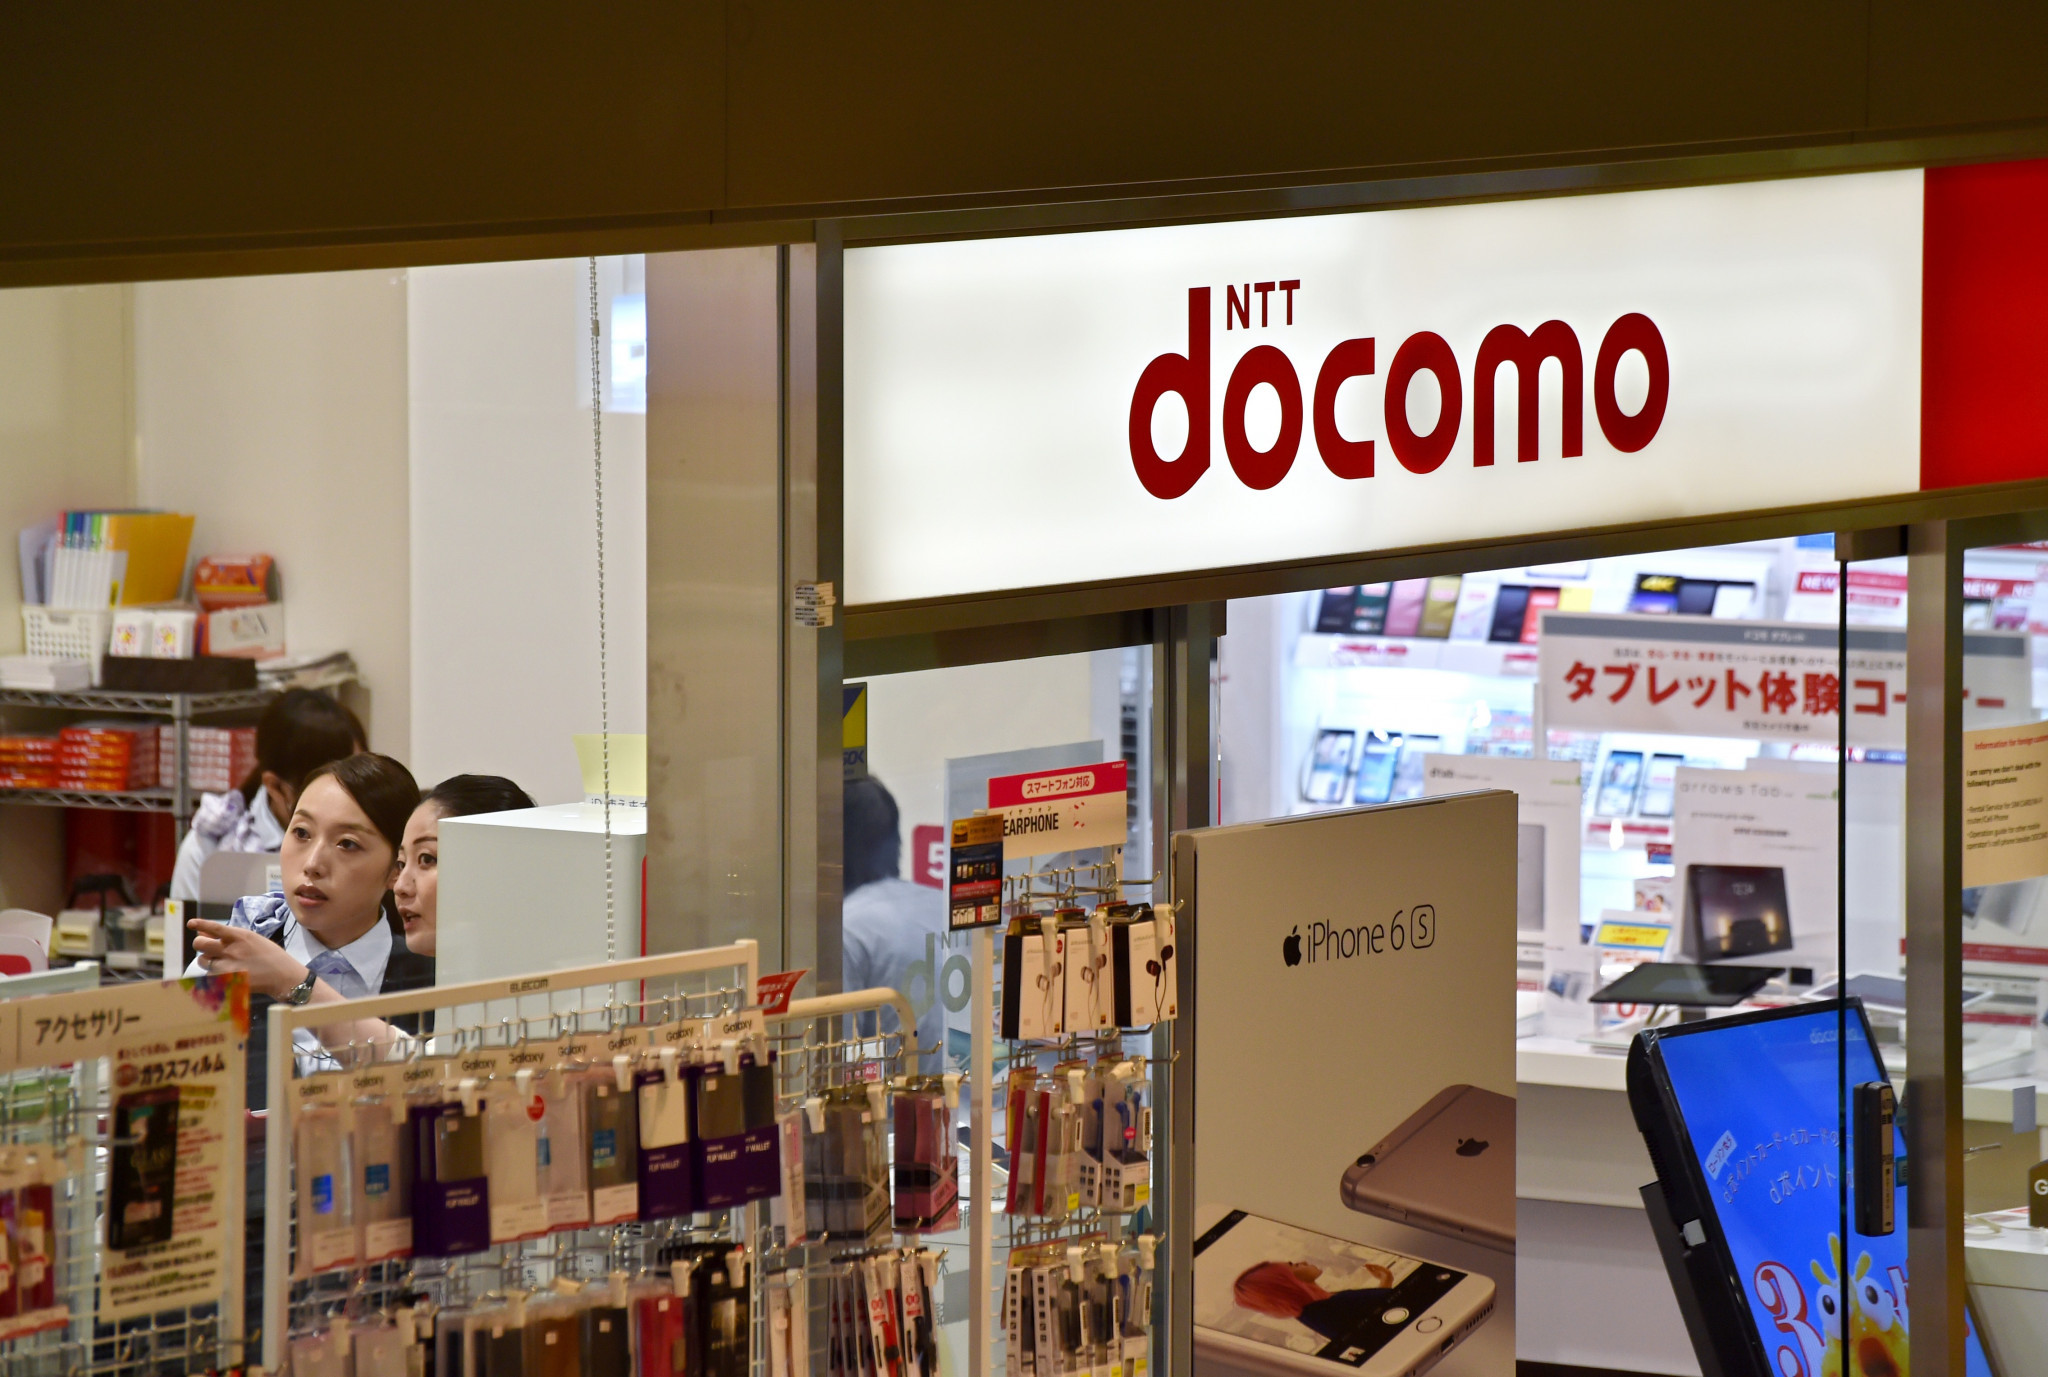 NTT DOCOMO is a Tokyo 2020 Gold Partner for telecommunications ©Getty Images